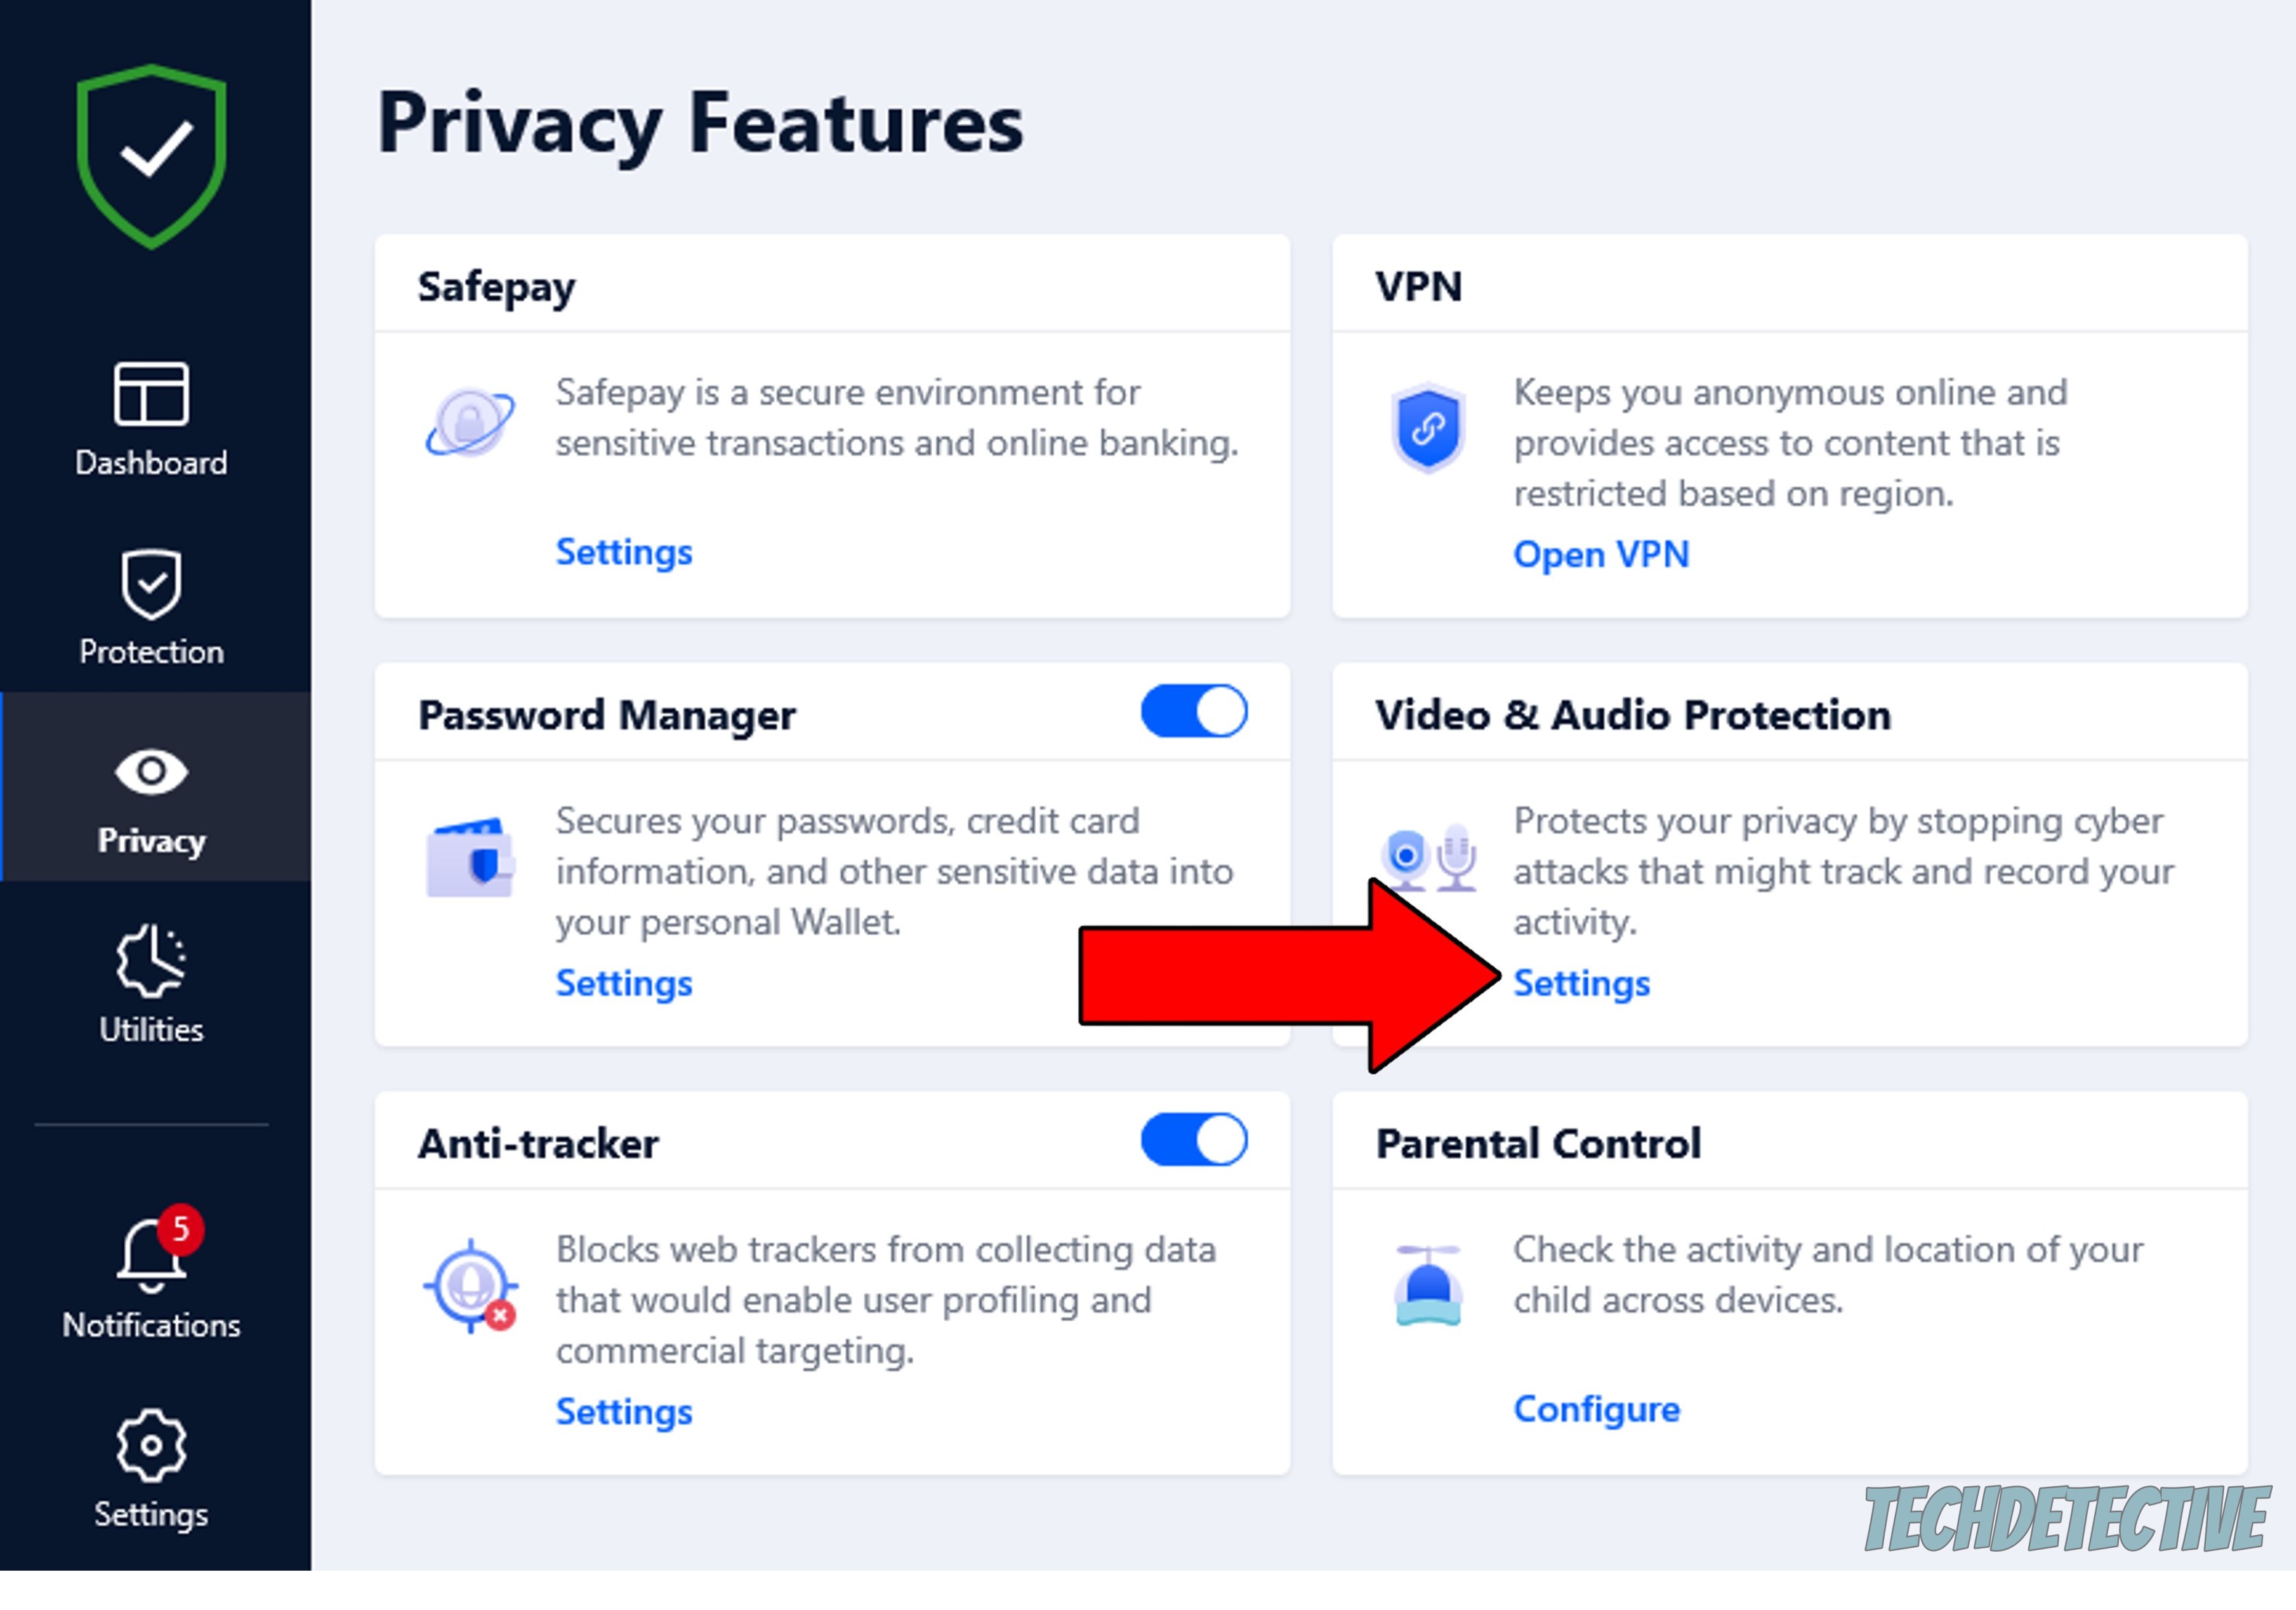 How to edit Video & Audio Protection settings on Bitdefender